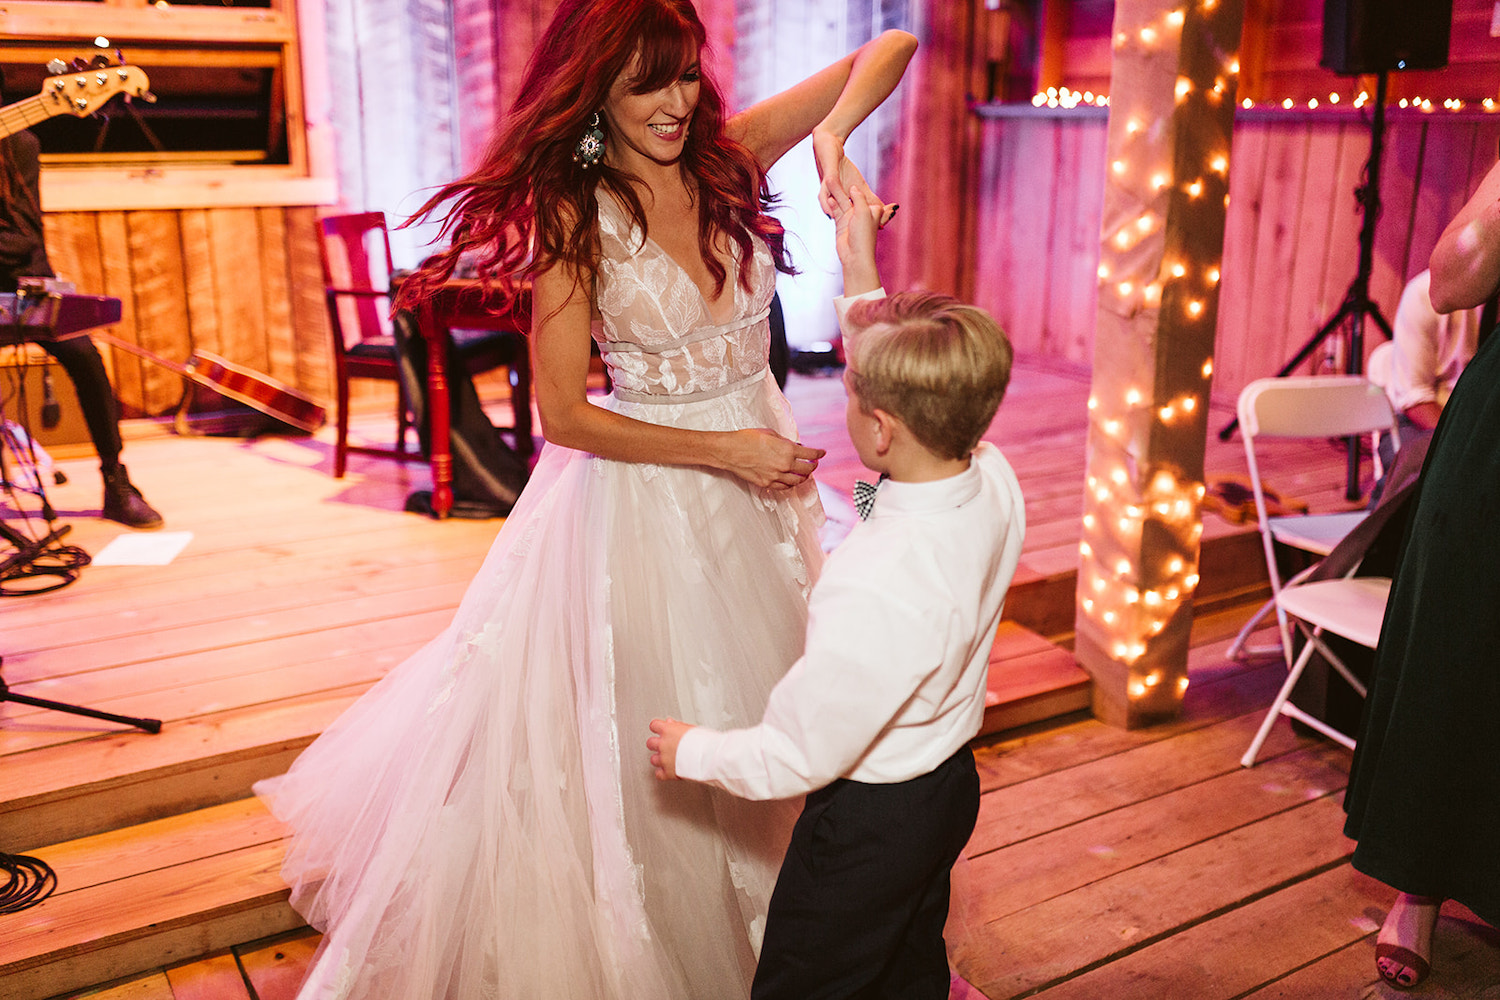 bride dances with young boy near band stage